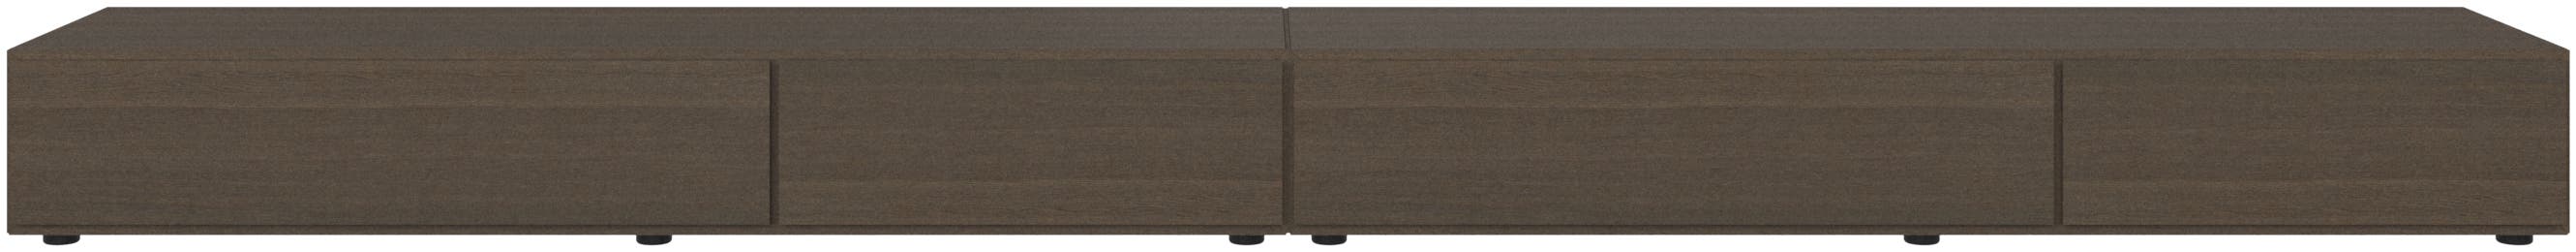 Lugano base cabinet with drawers and drop-down doors